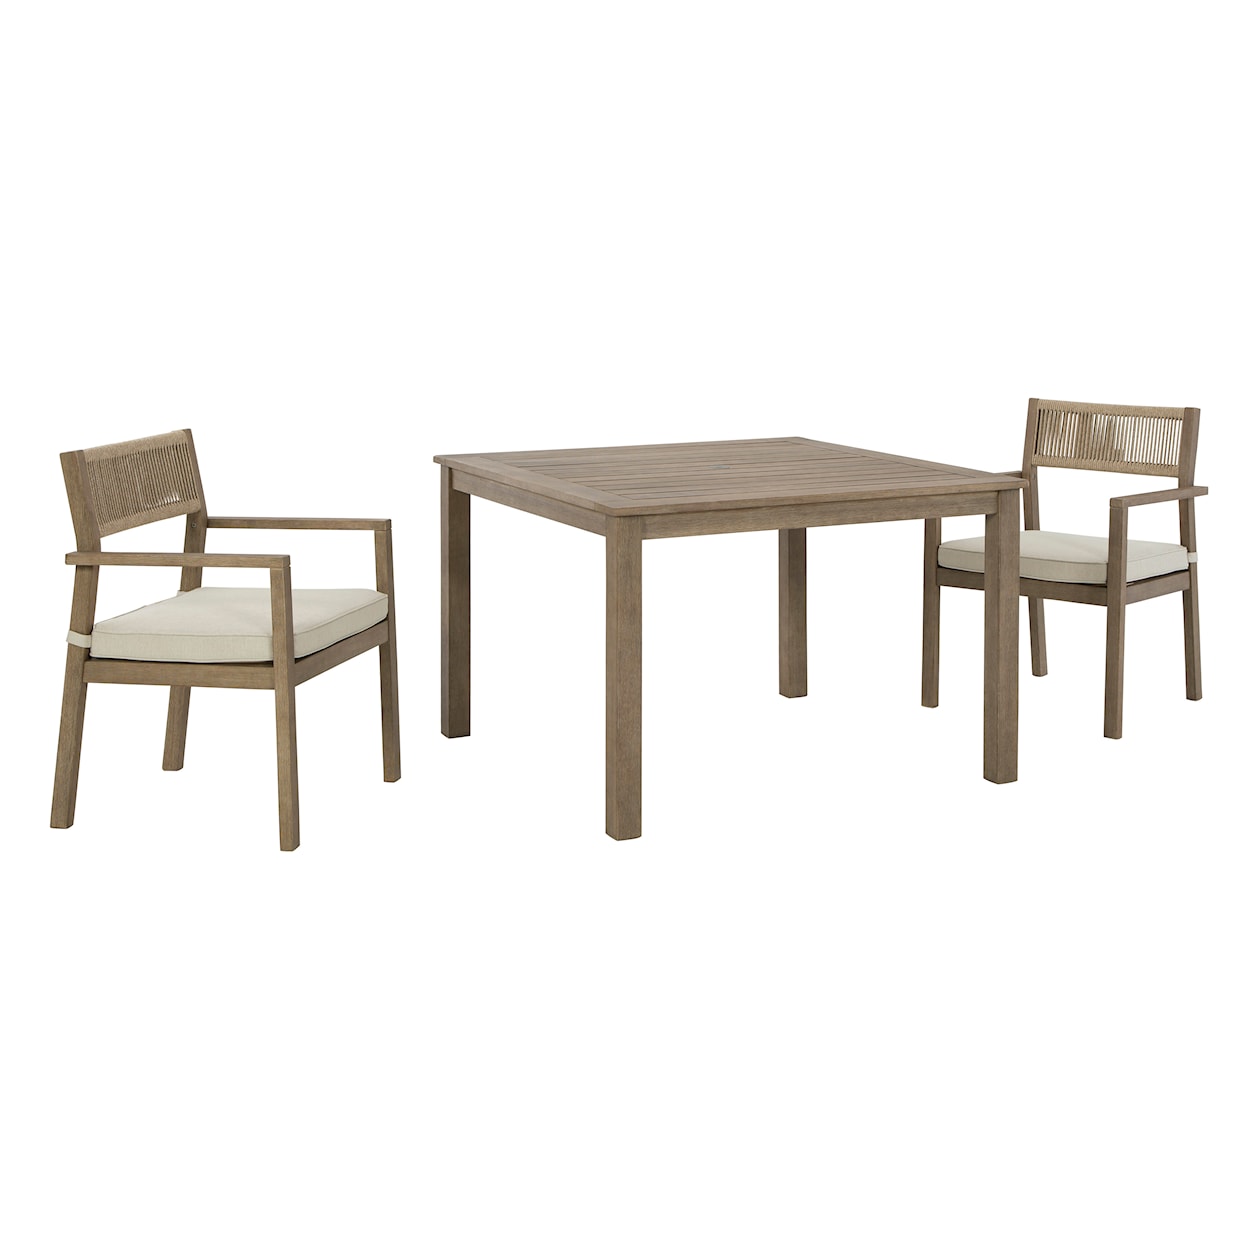 Signature Design by Ashley Aria Plains Outdoor Dining Table